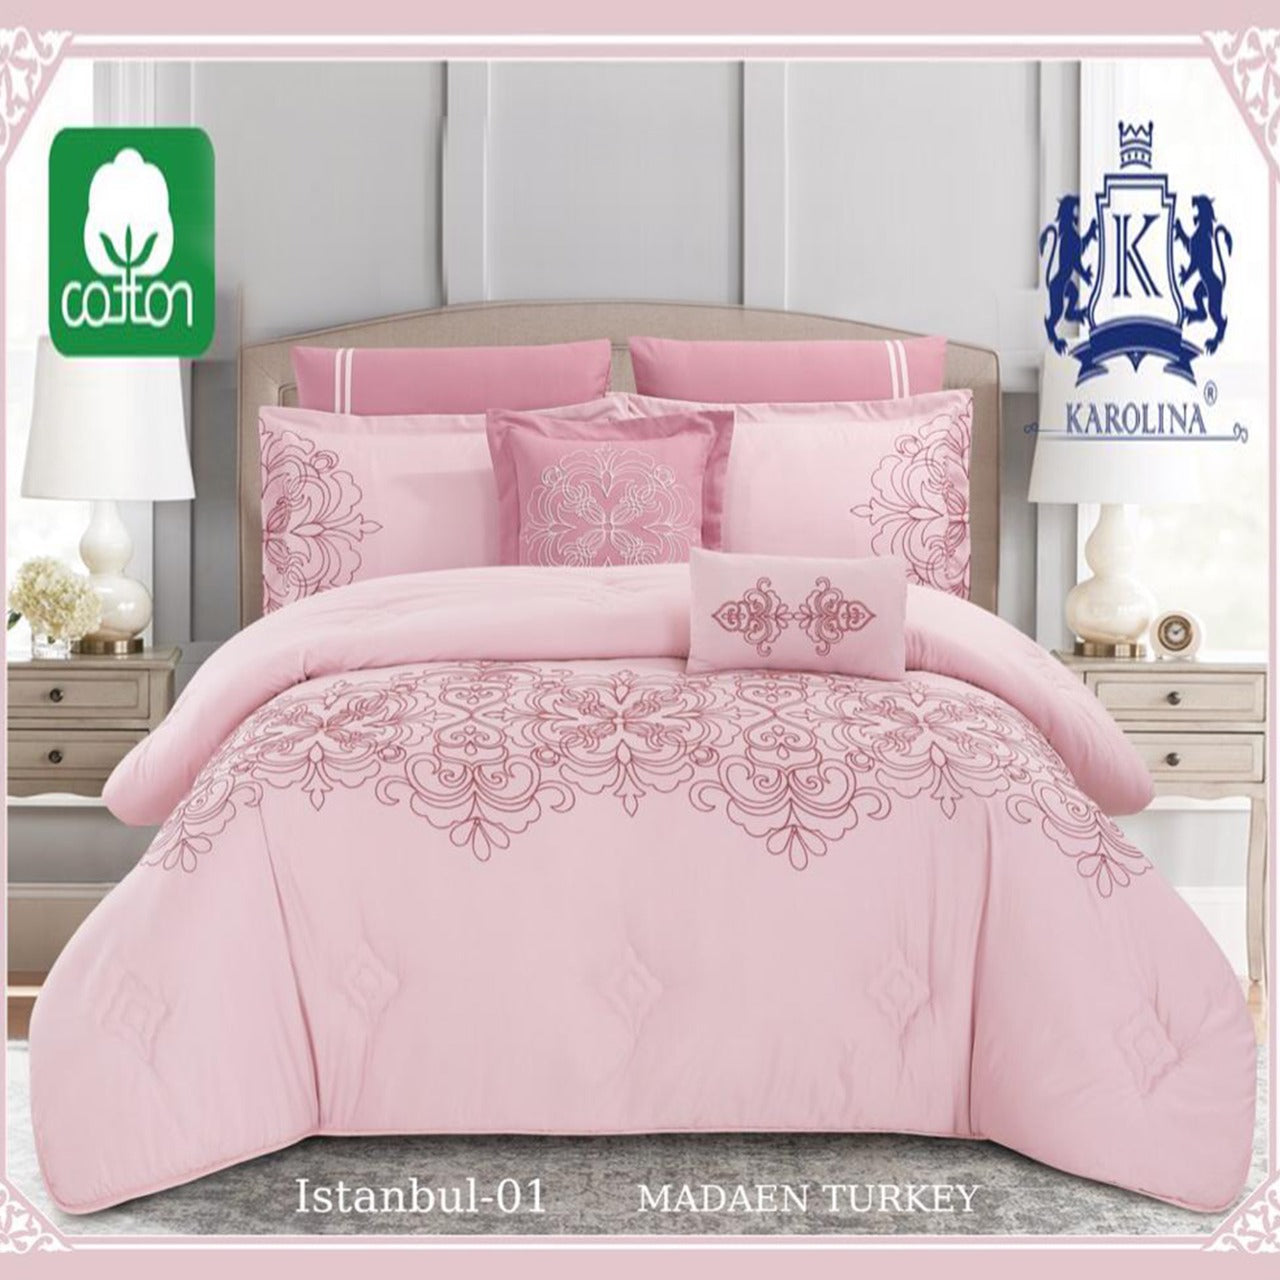 10 Piece Comforter Bedding With Sheet and Decorative Pillow Shams | Made in Turkey Istanbul-01 Zaappy